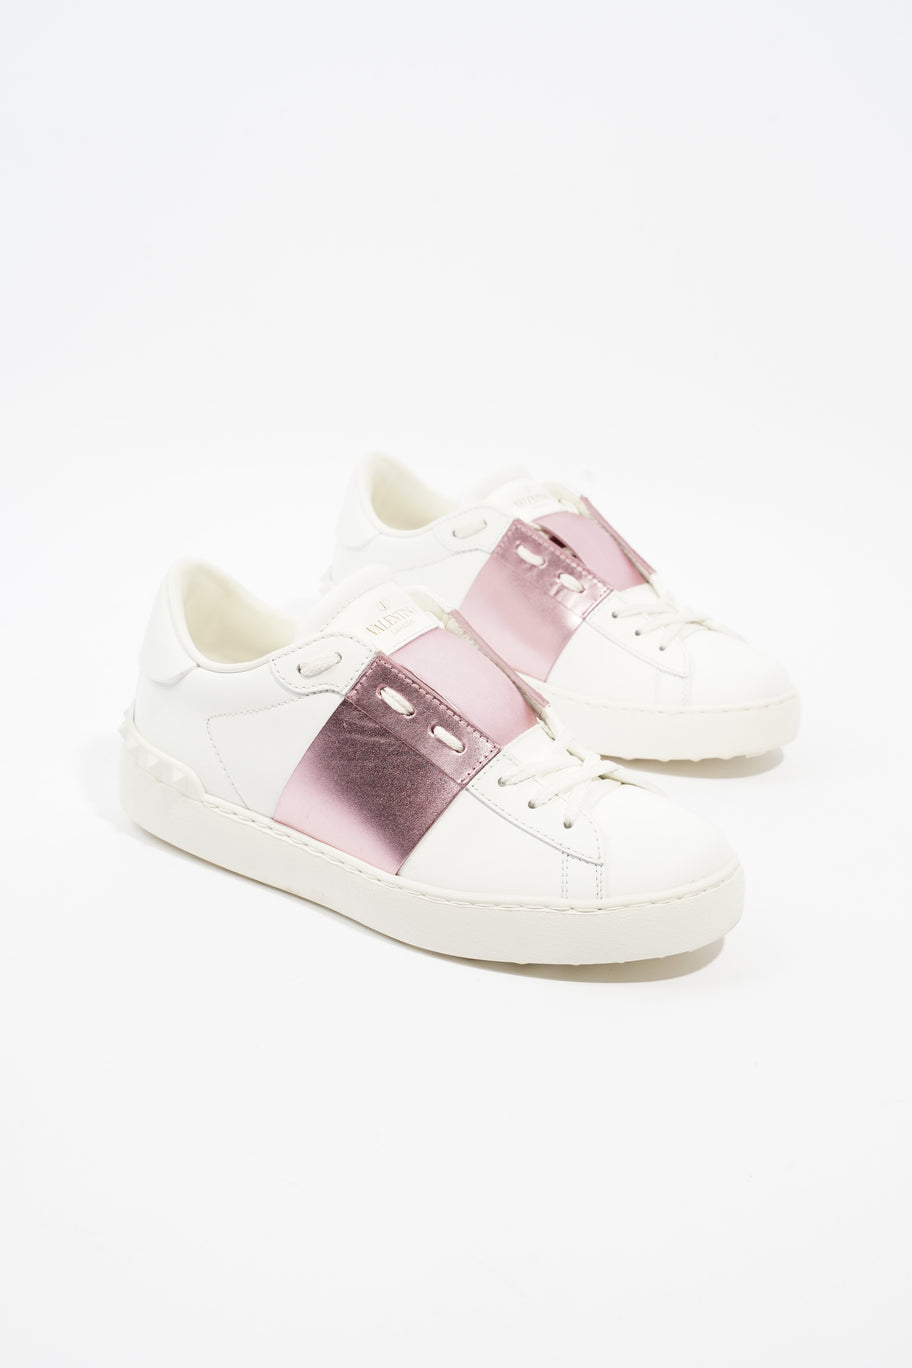 Open Sneakers White / Pink Leather EU 37.5 UK 4.5 Image 2